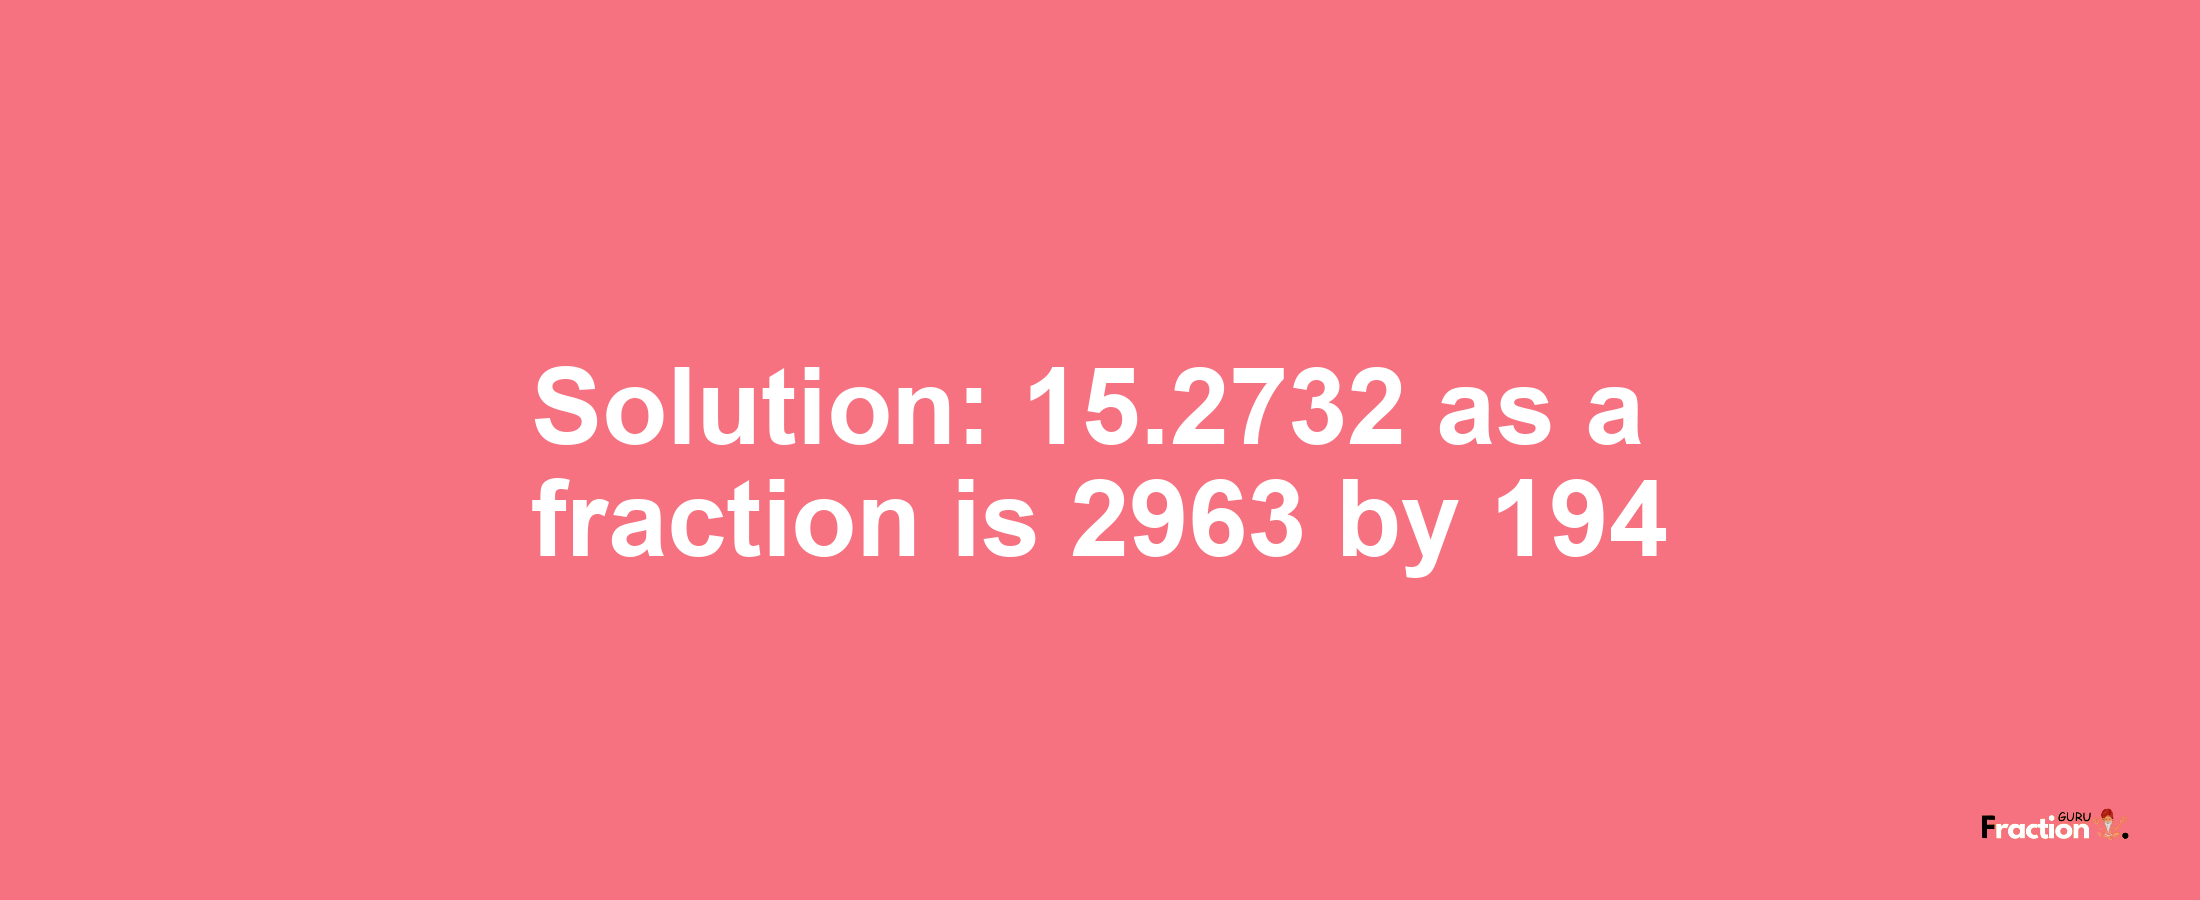 Solution:15.2732 as a fraction is 2963/194